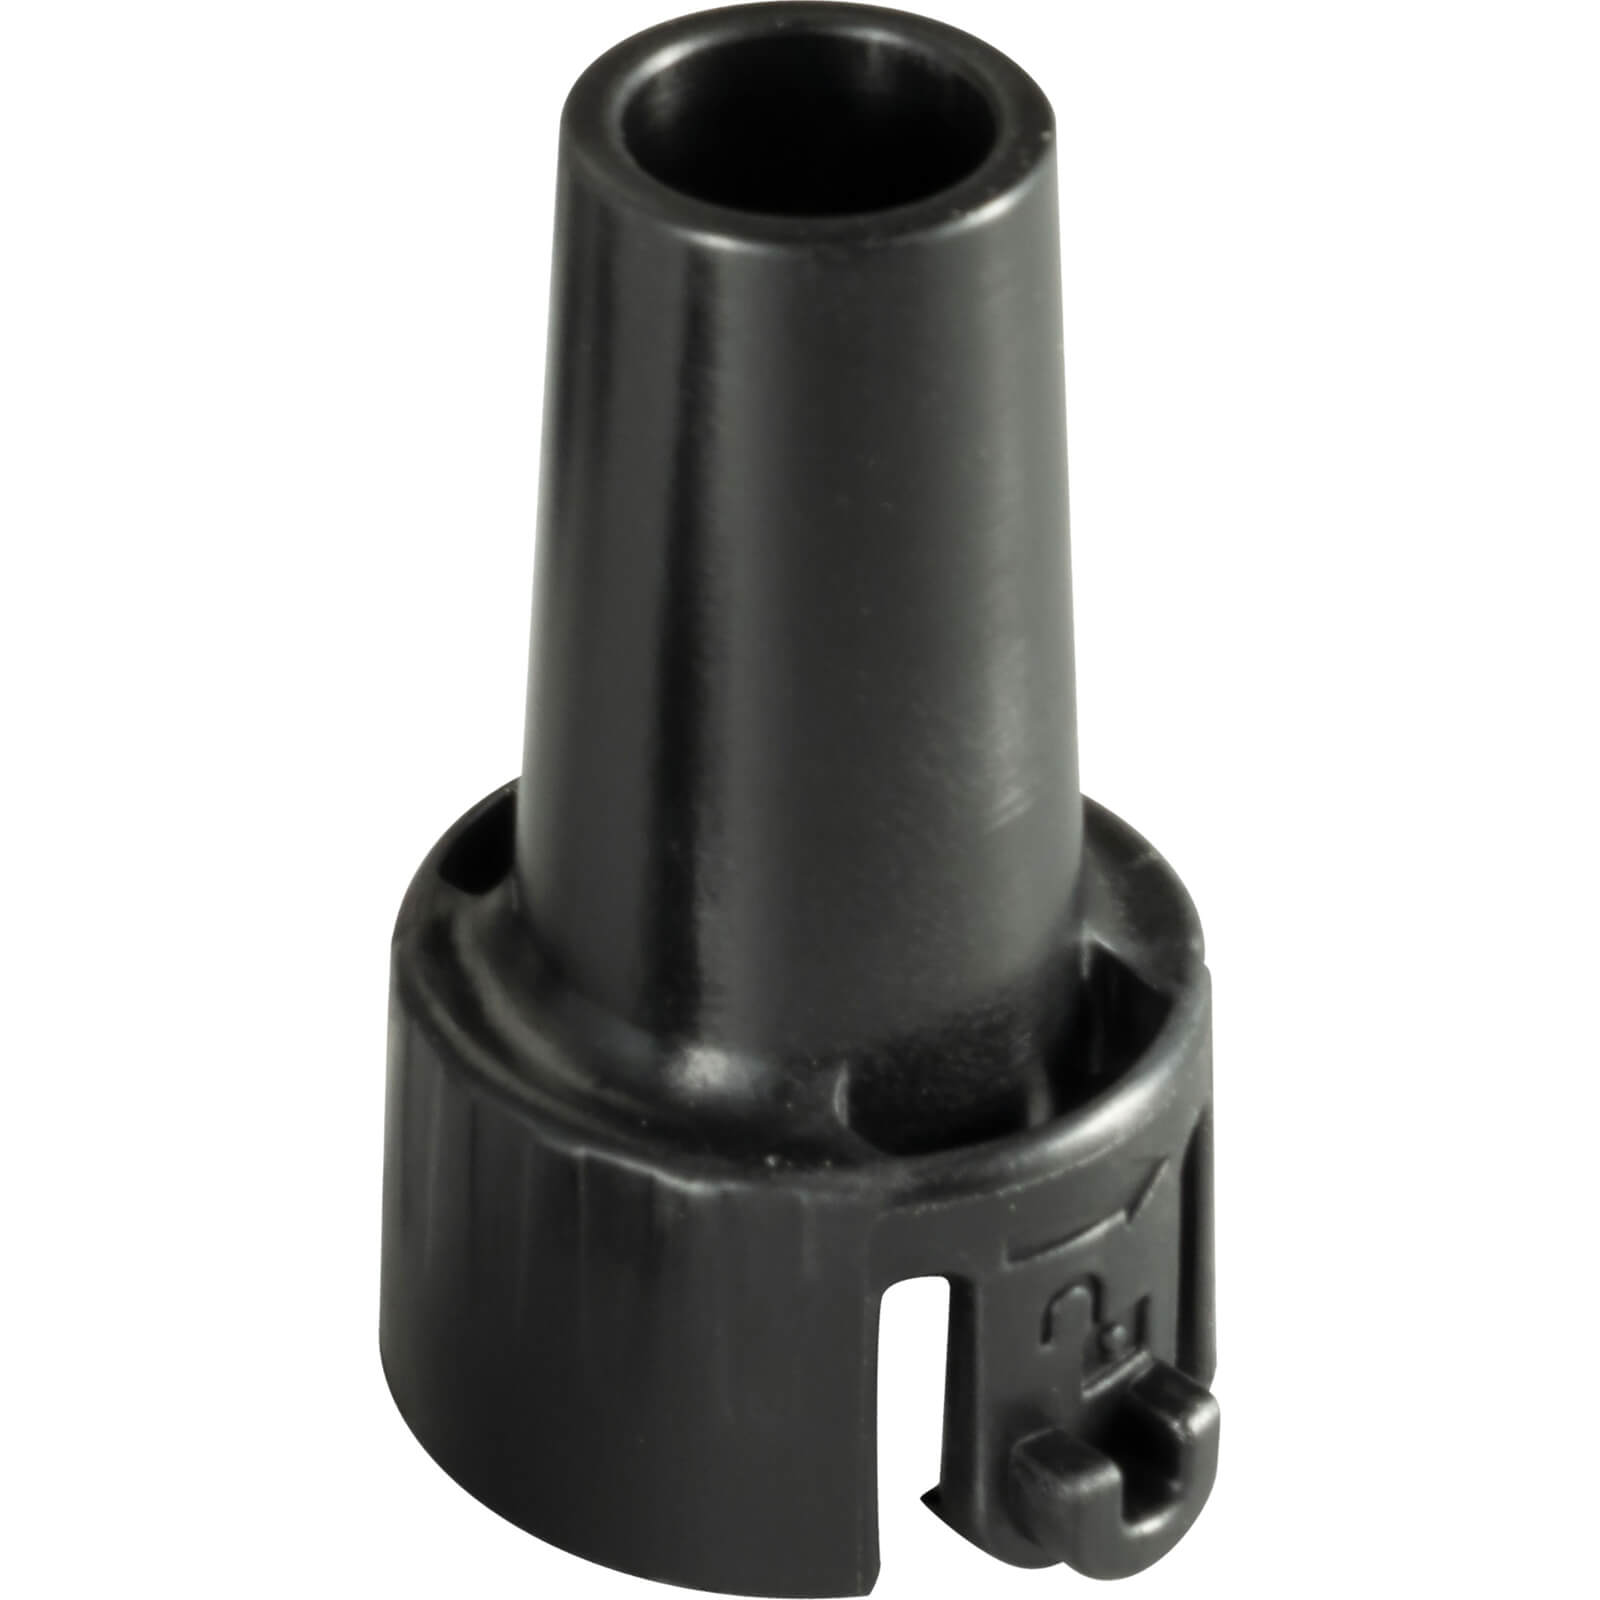 Image of Makita Nozzle 13 for AS001G Dust Blower